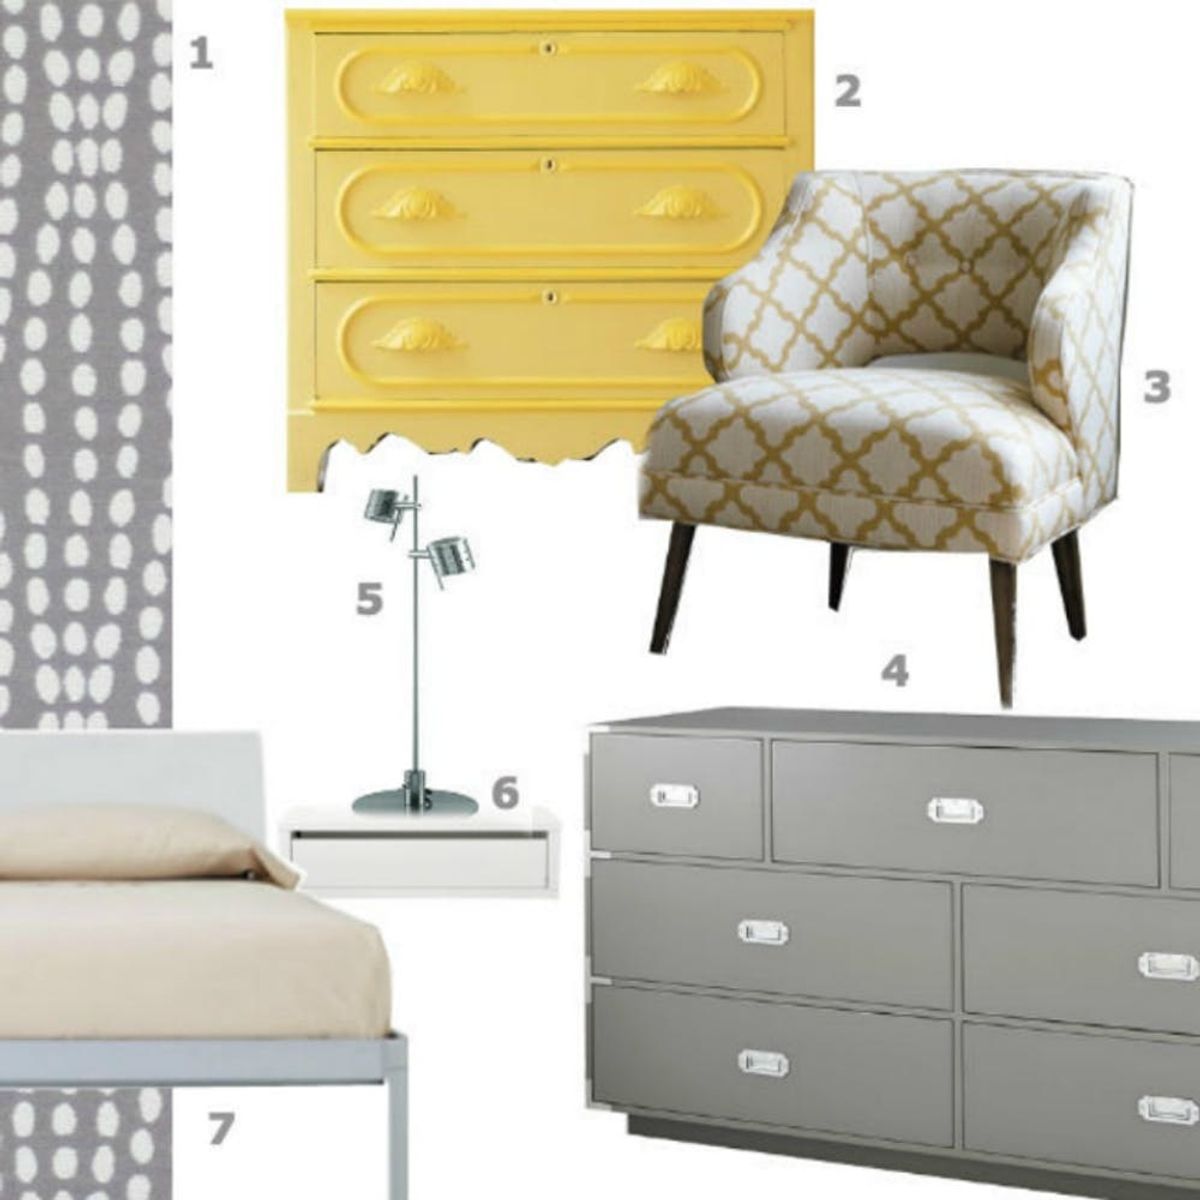 A Mood Board Can Jump-Start Your Home Decor Plan